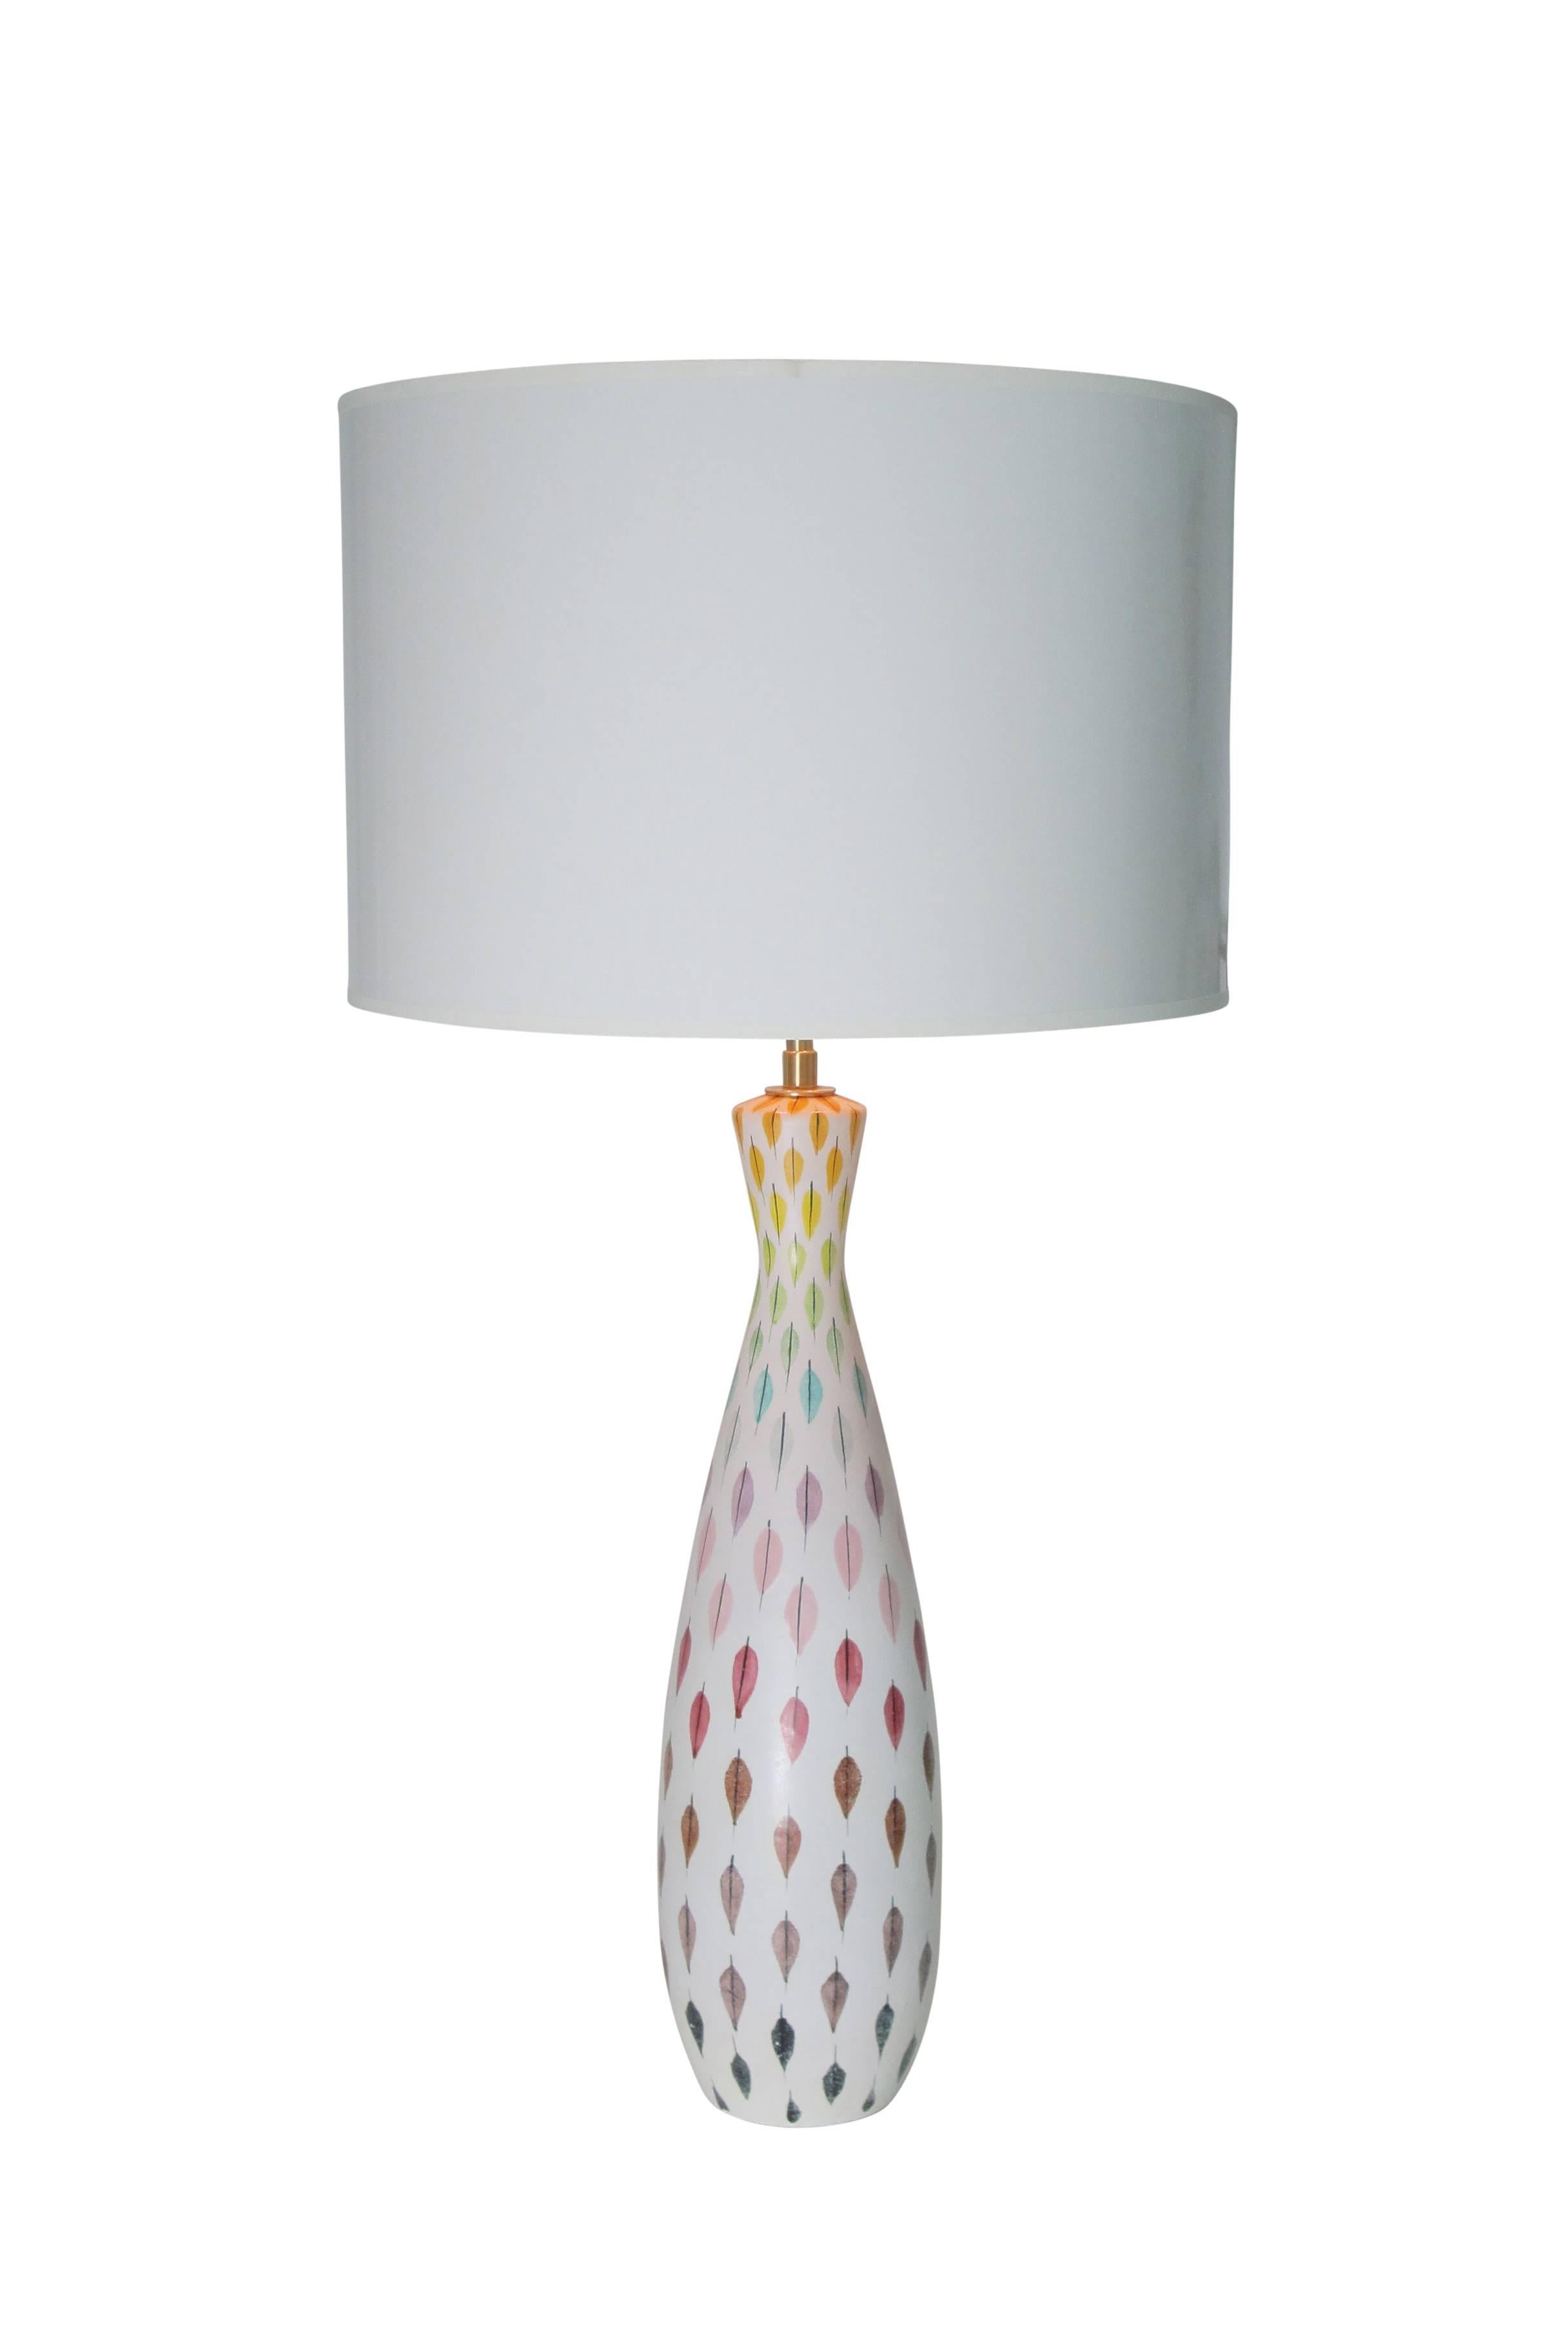 Bitossi Raymor ceramic feather Piume multi-color lamps pair signed, Italy, 1950s. Aldo Londi for Bitossi bowling pin form ceramic lamps decorated with multi-color feather pattern. Bright colors. Height of the ceramic: 18 inches. Rewired with new